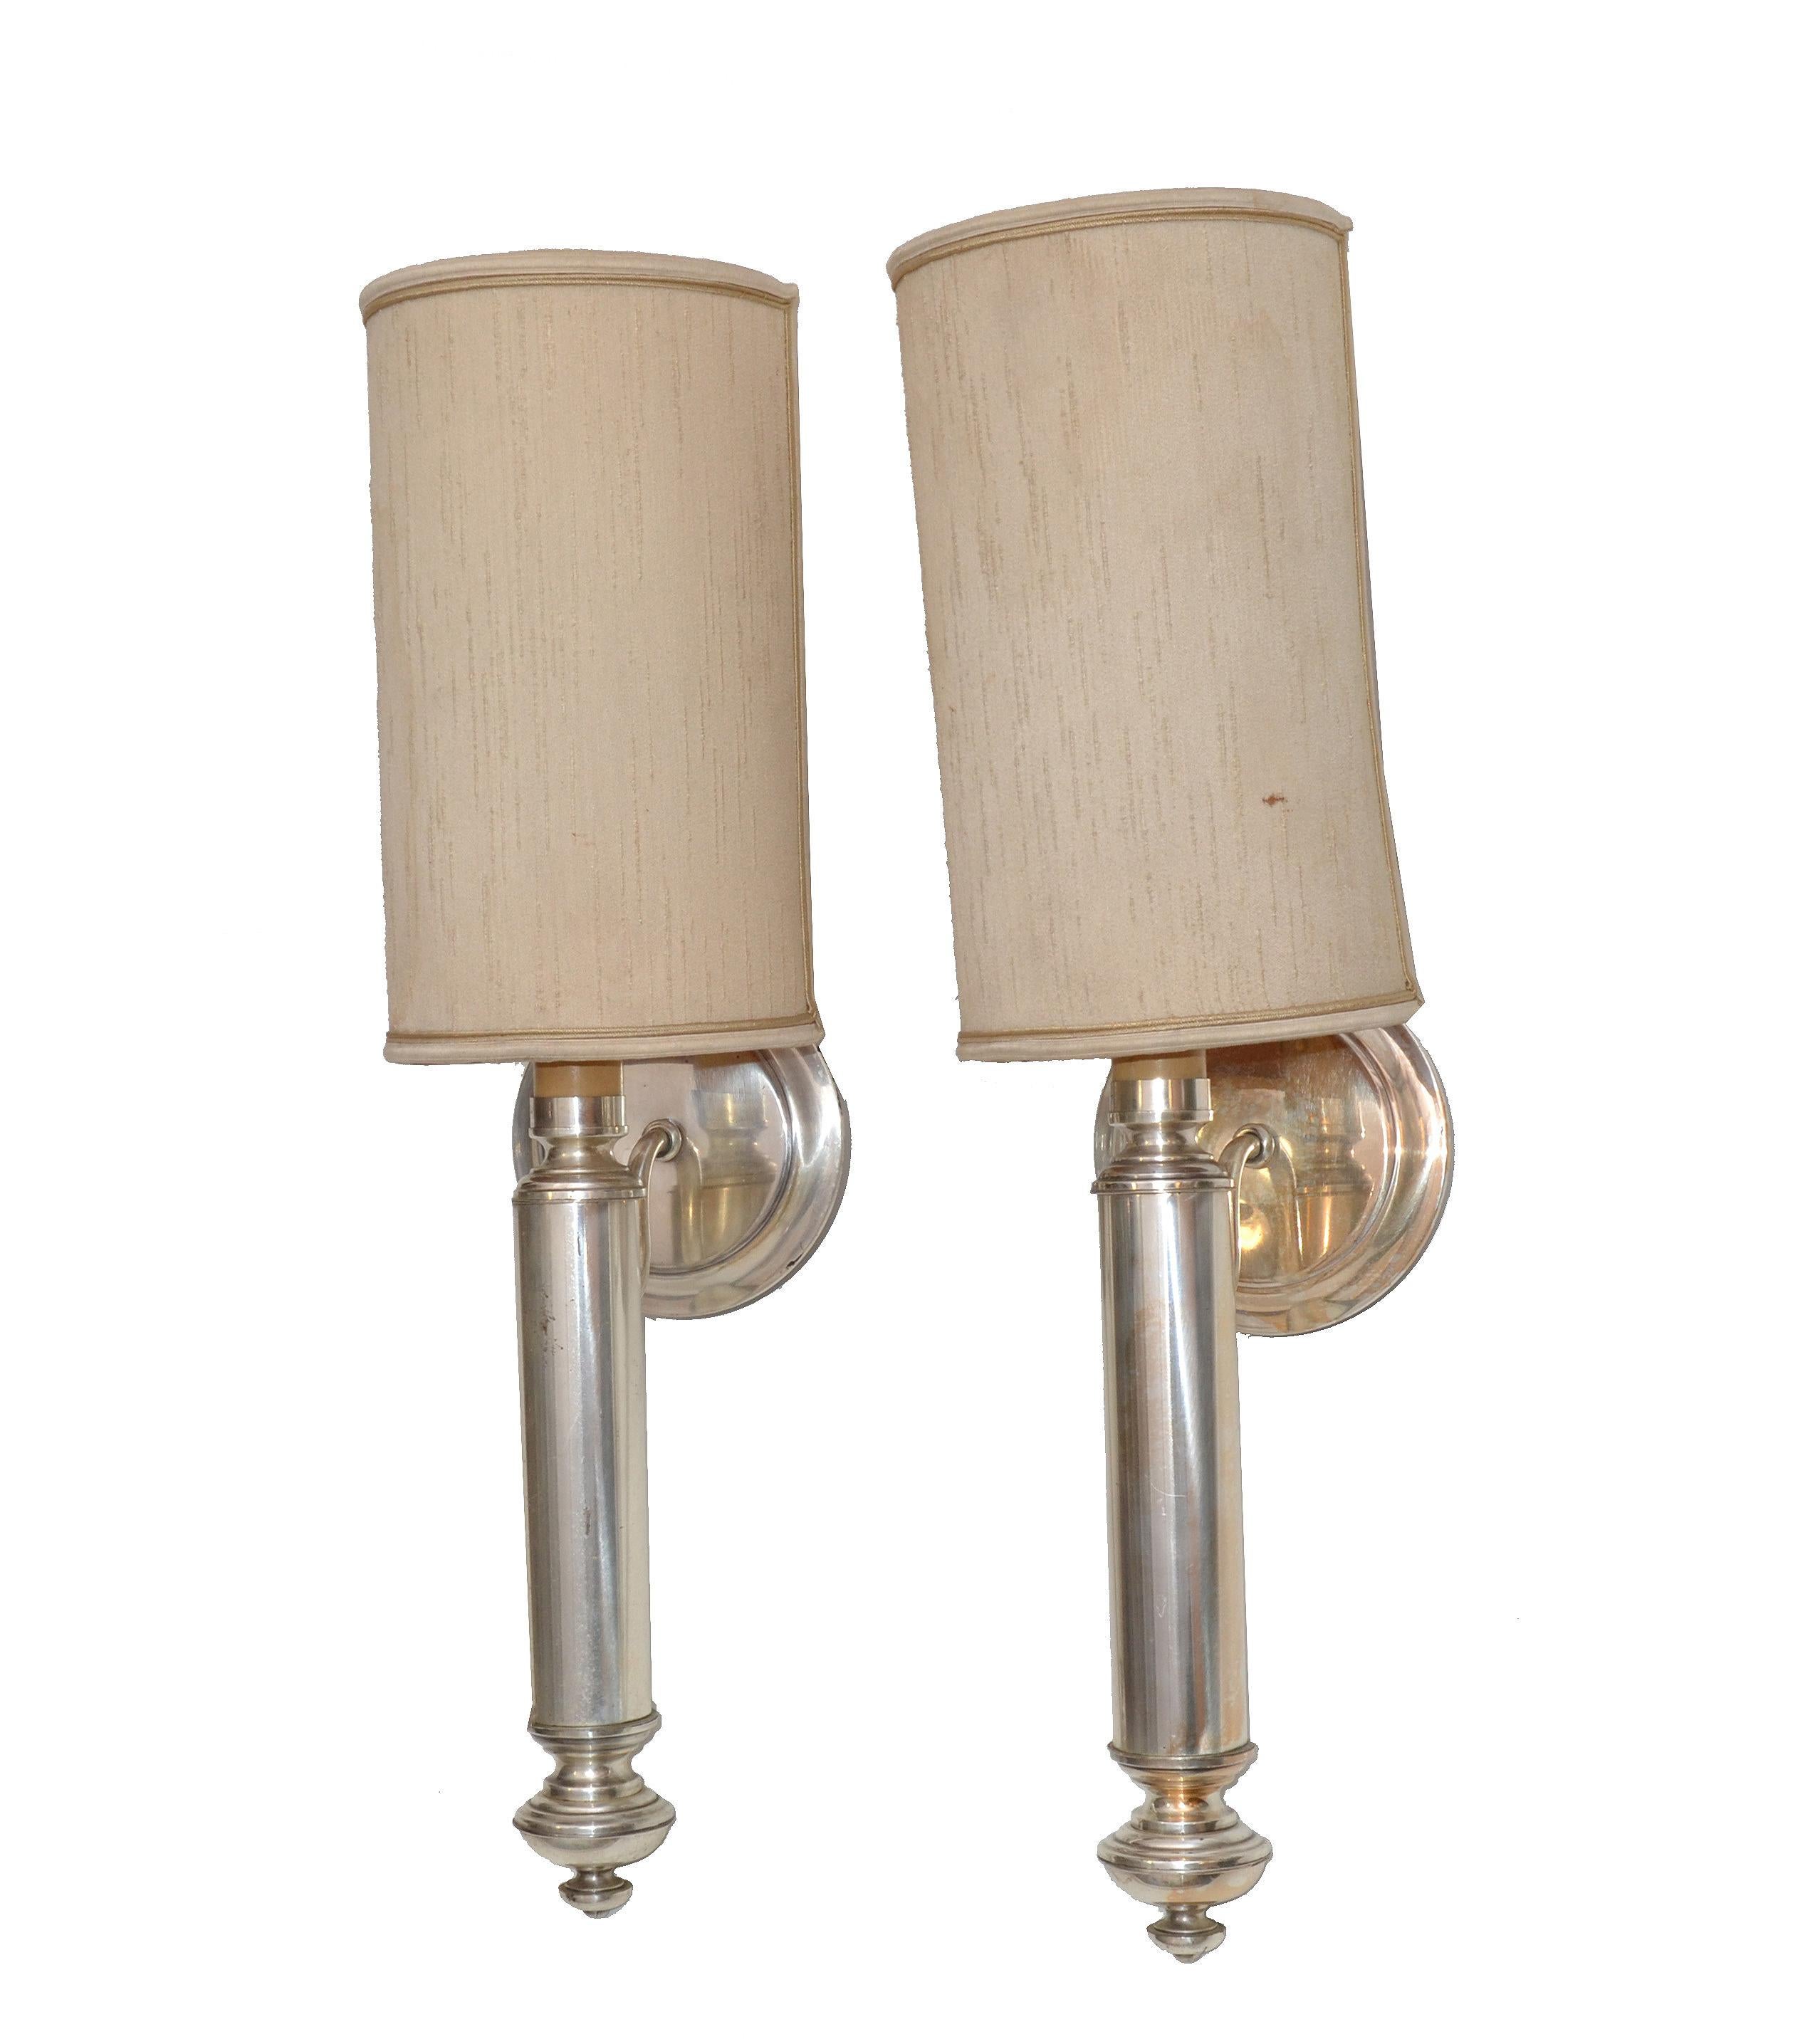 Pair of very elegant French Mid-Century Modern Maison Lancel silvered brass wall sconces.
Come from an estate in Paris, France and are dated circa 1970s.
Wired for US and in working condition each Sconce takes one bulb with max. 75